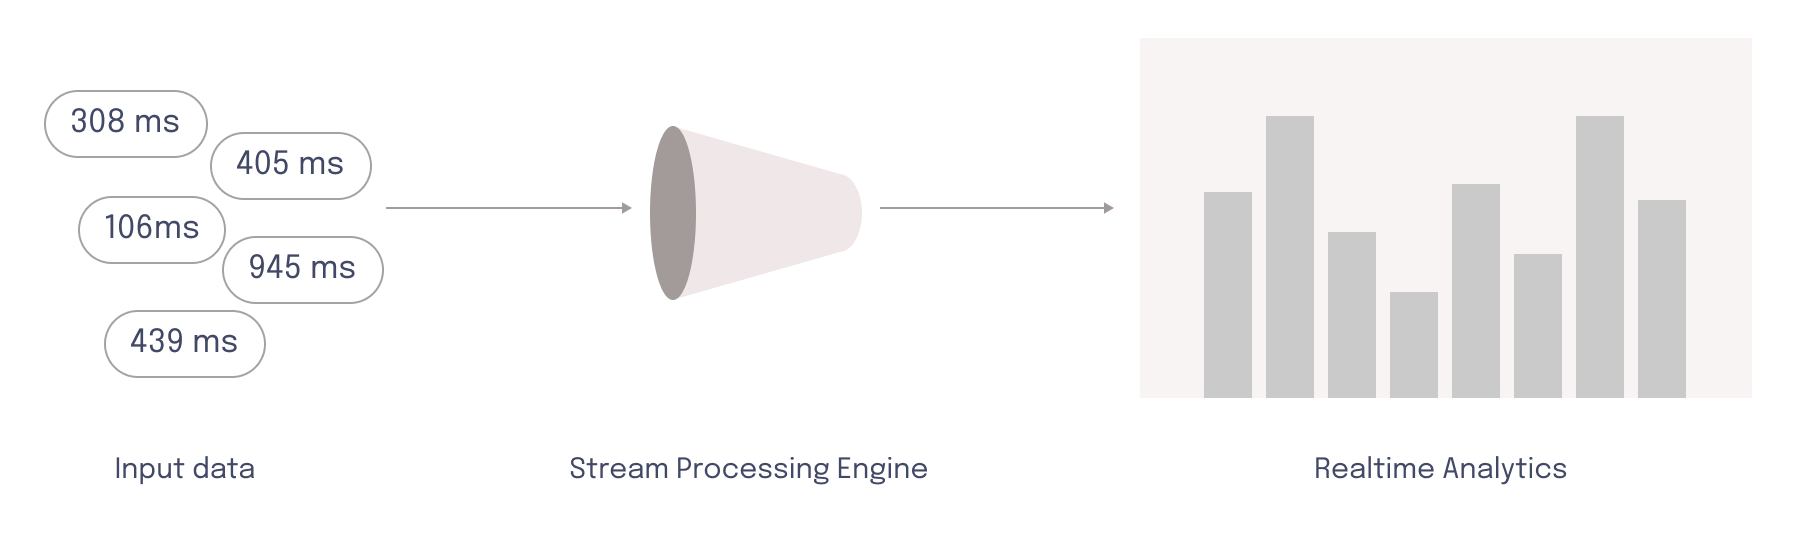 Diagram of stream processing engine for visualizing data in near real-time